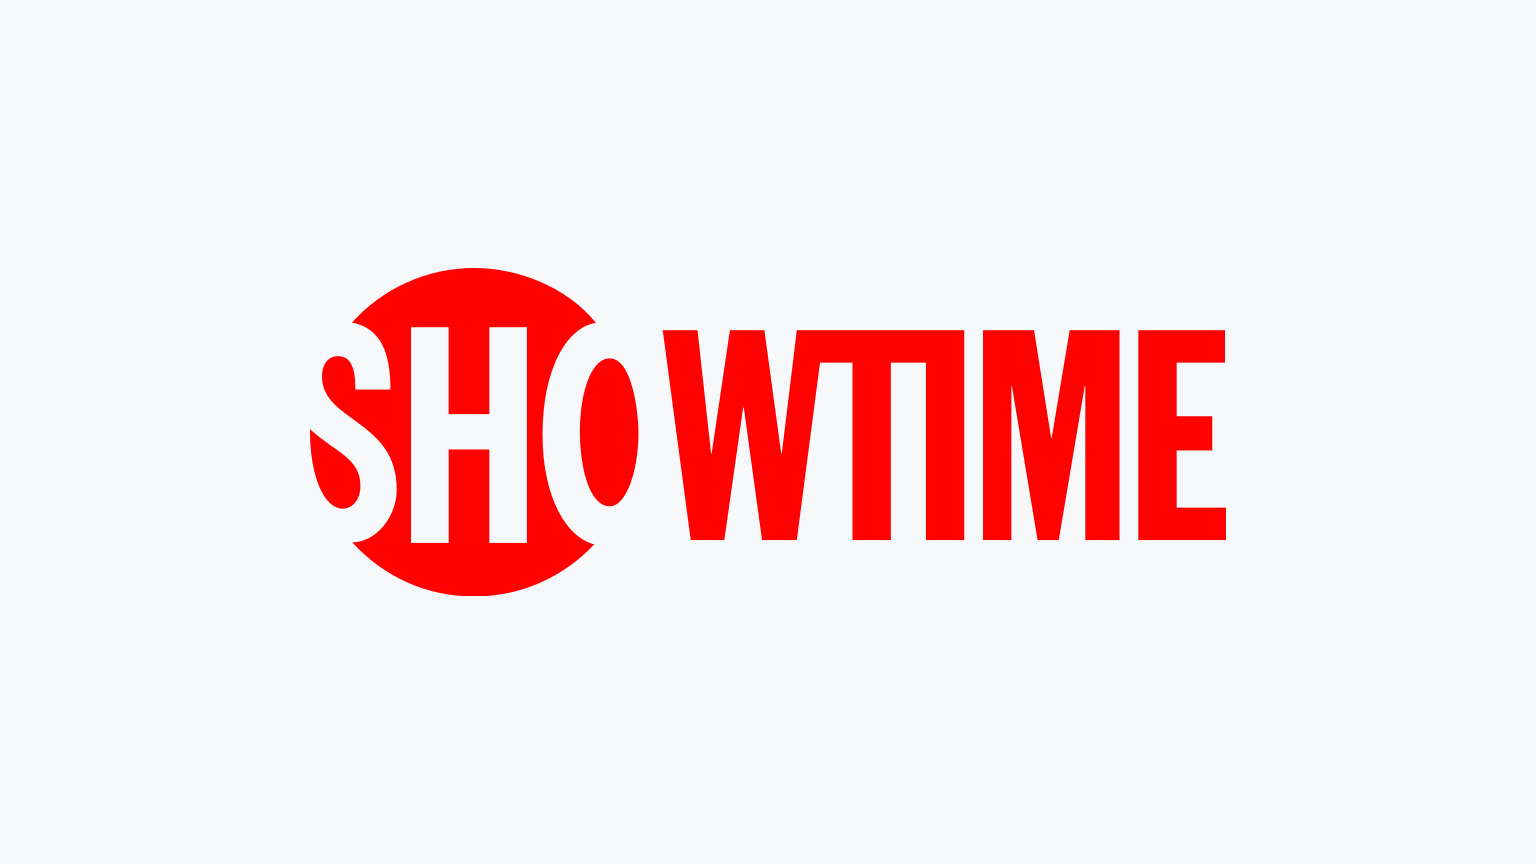 How to Watch Showtime Live Without Cable in 2022